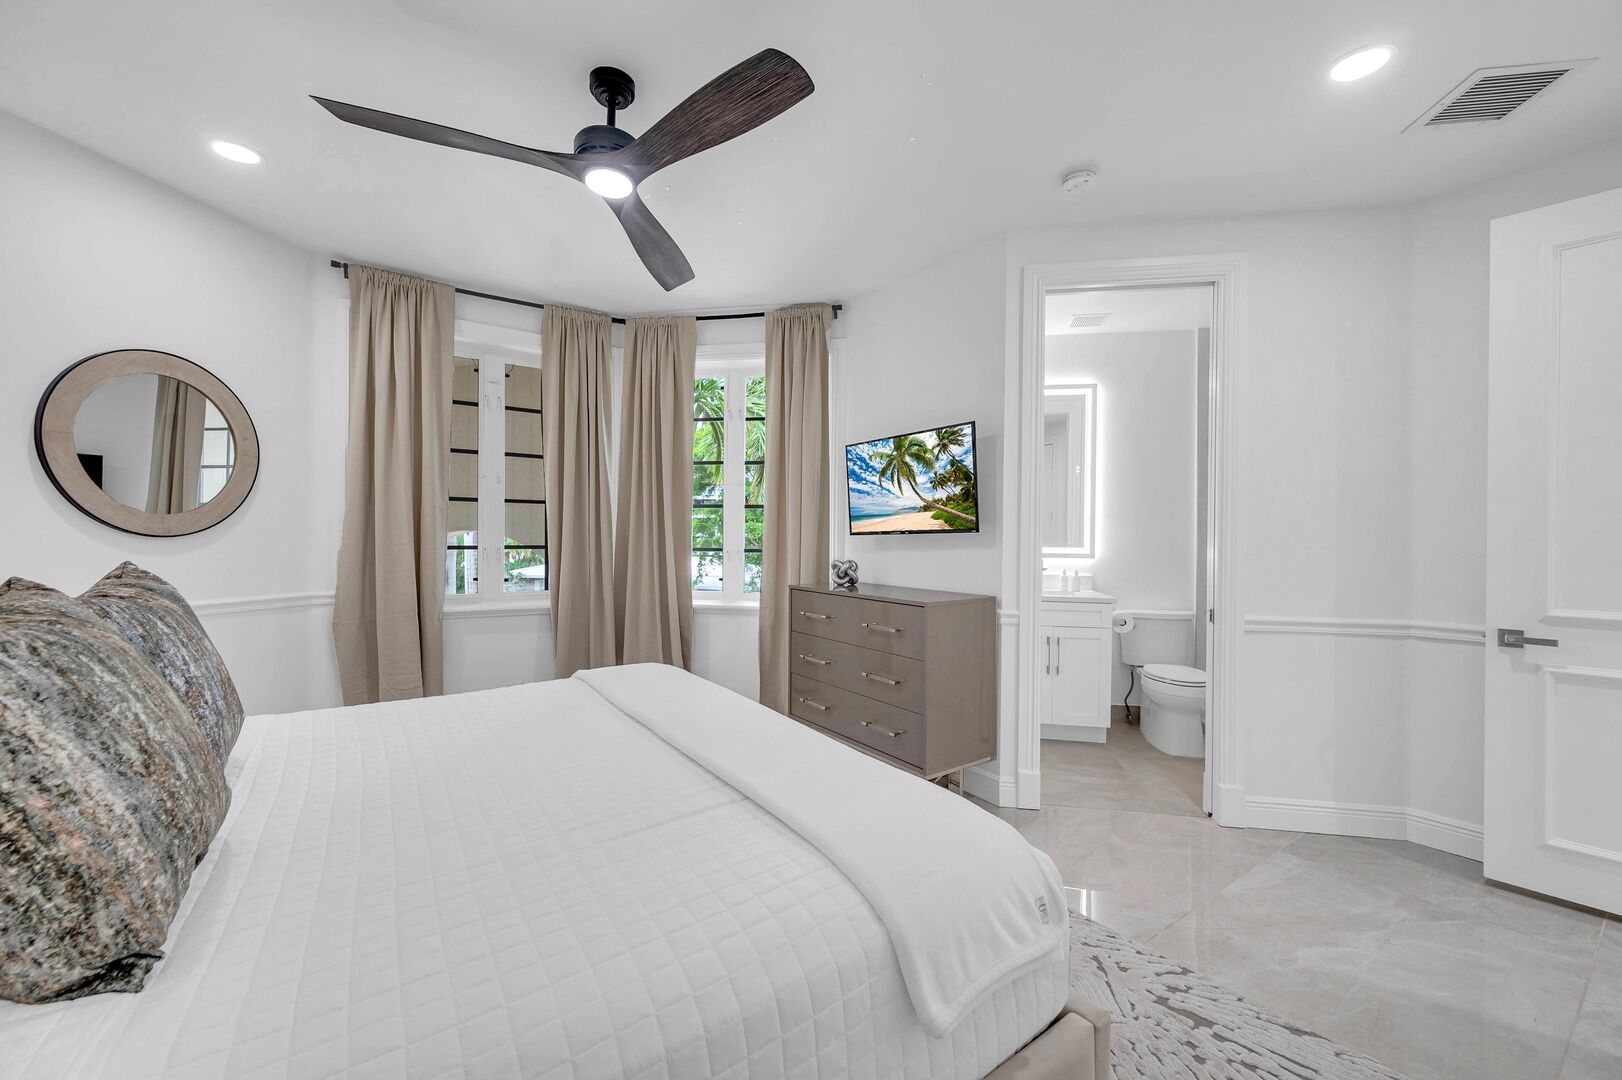 Bedroom Four boasts a king size bed, smart TV, and an ensuite bathroom.